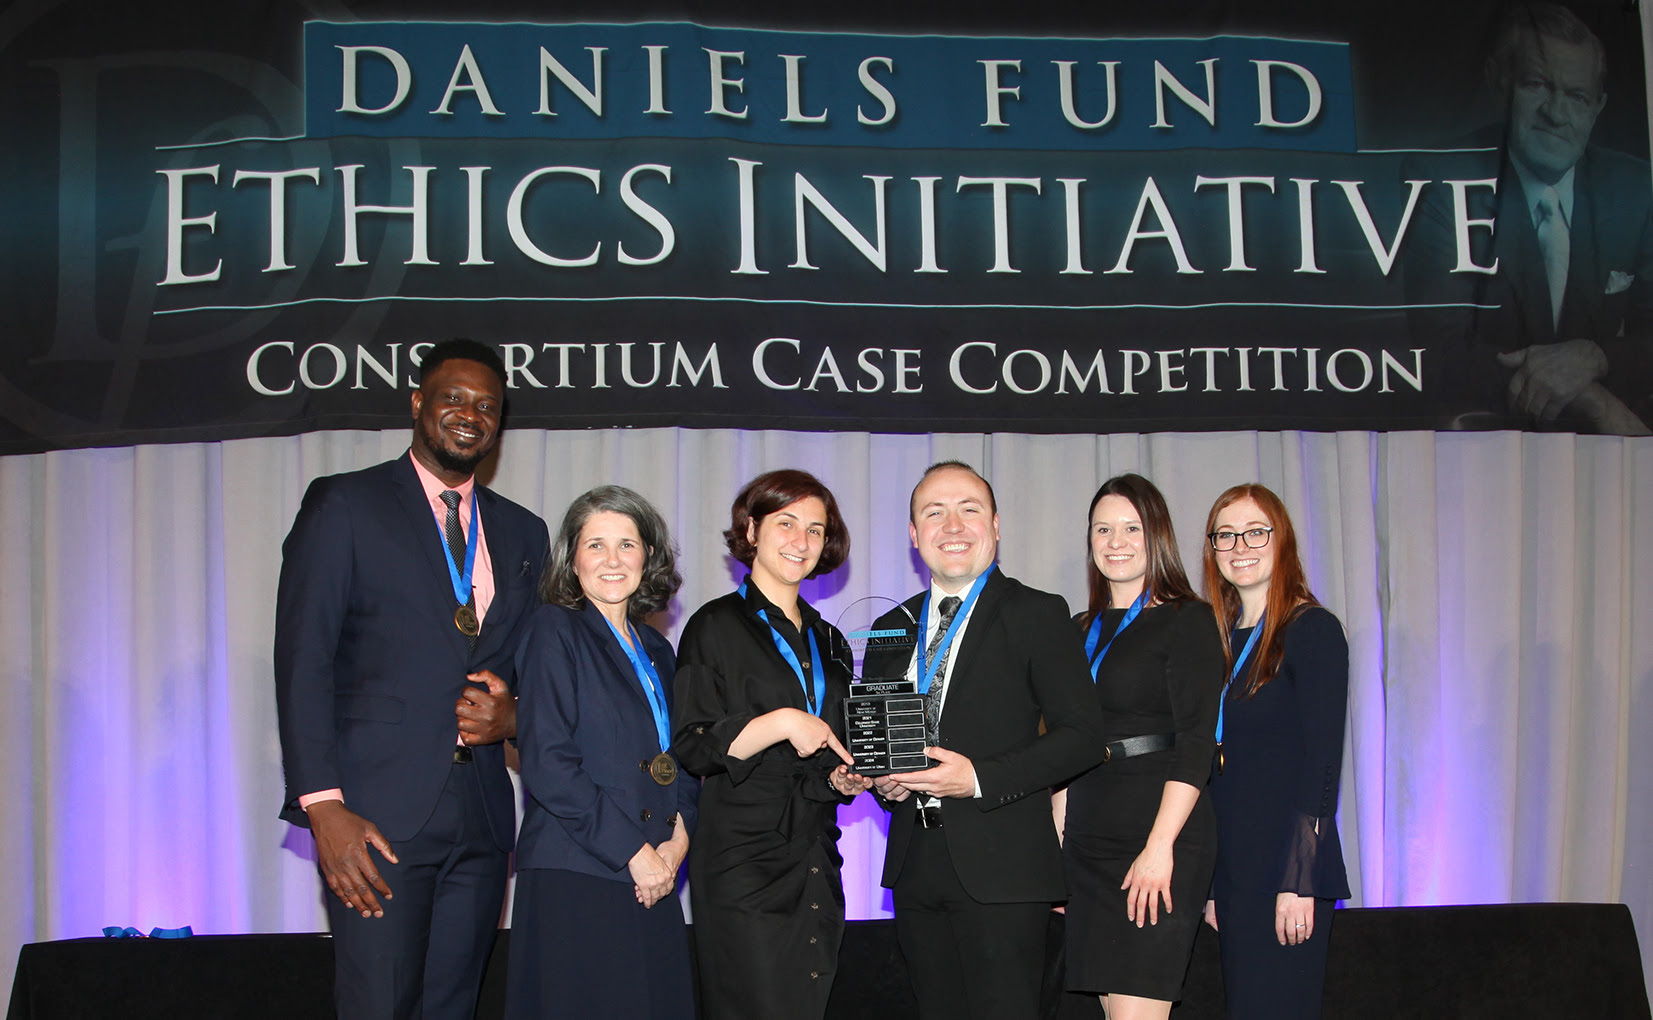 The Daniels Fund Ethics Initiative’s twelfth annual Case Competition took place April 19.